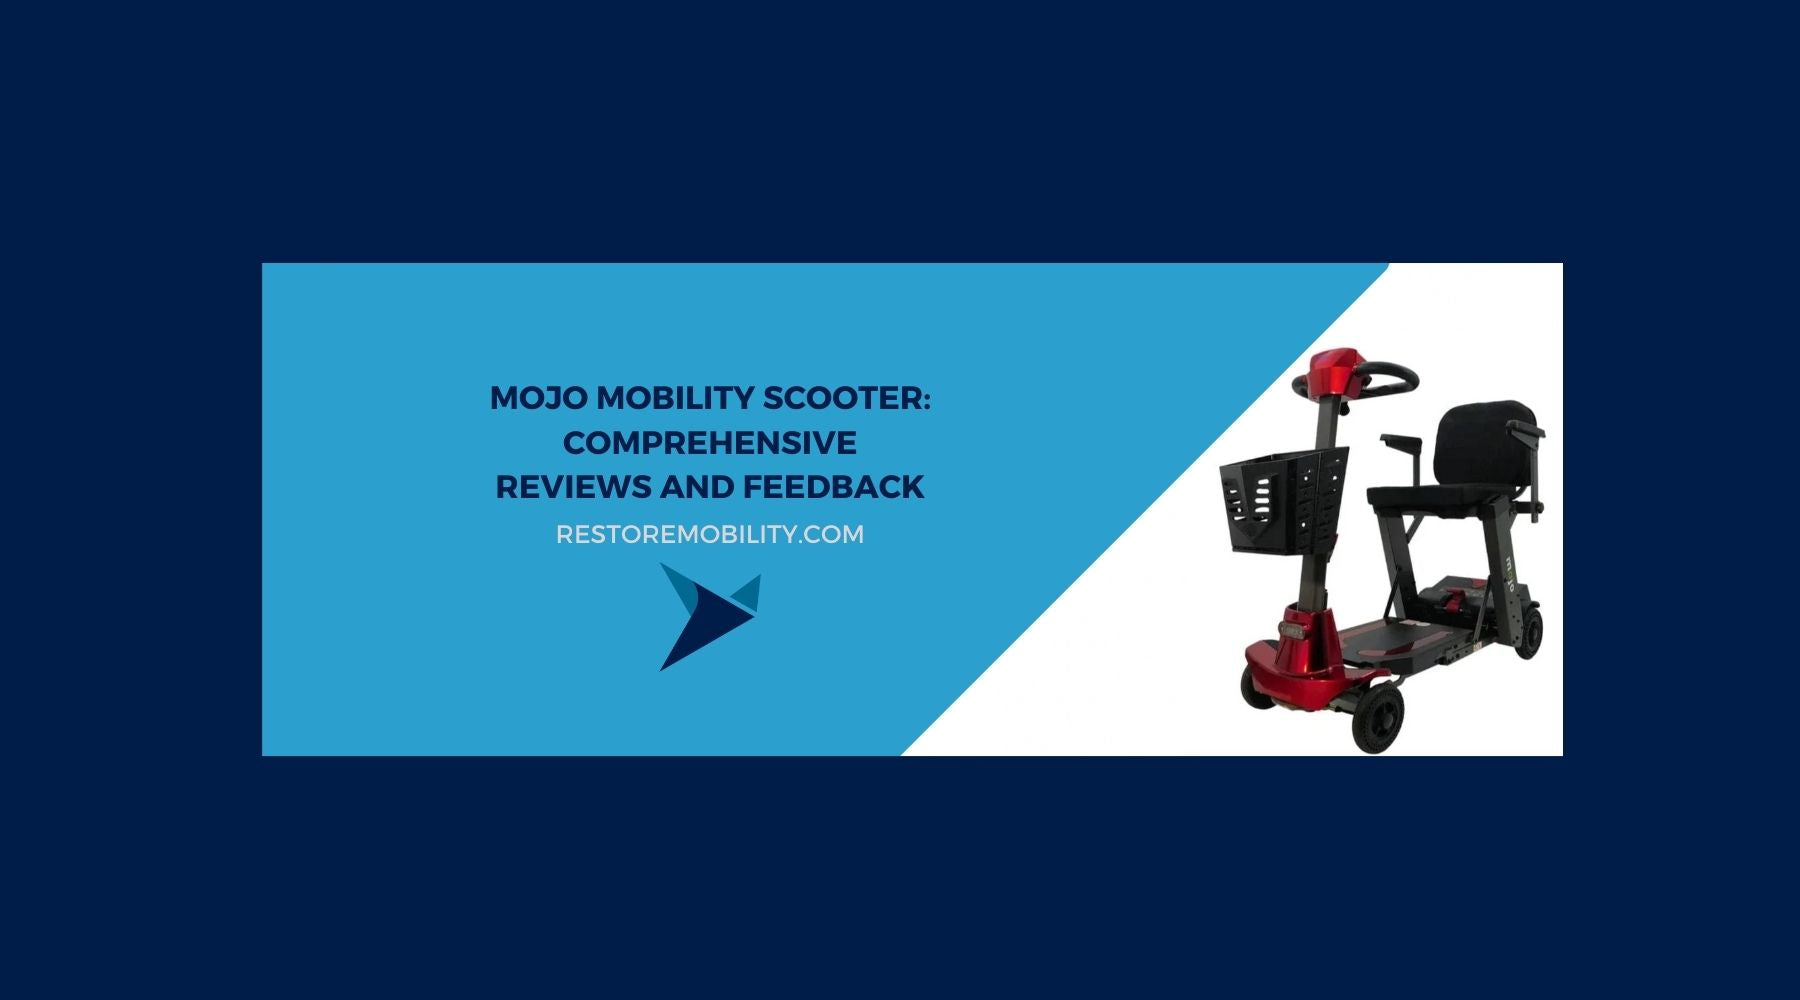 Mojo Mobility Scooter: Comprehensive Reviews and Feedback